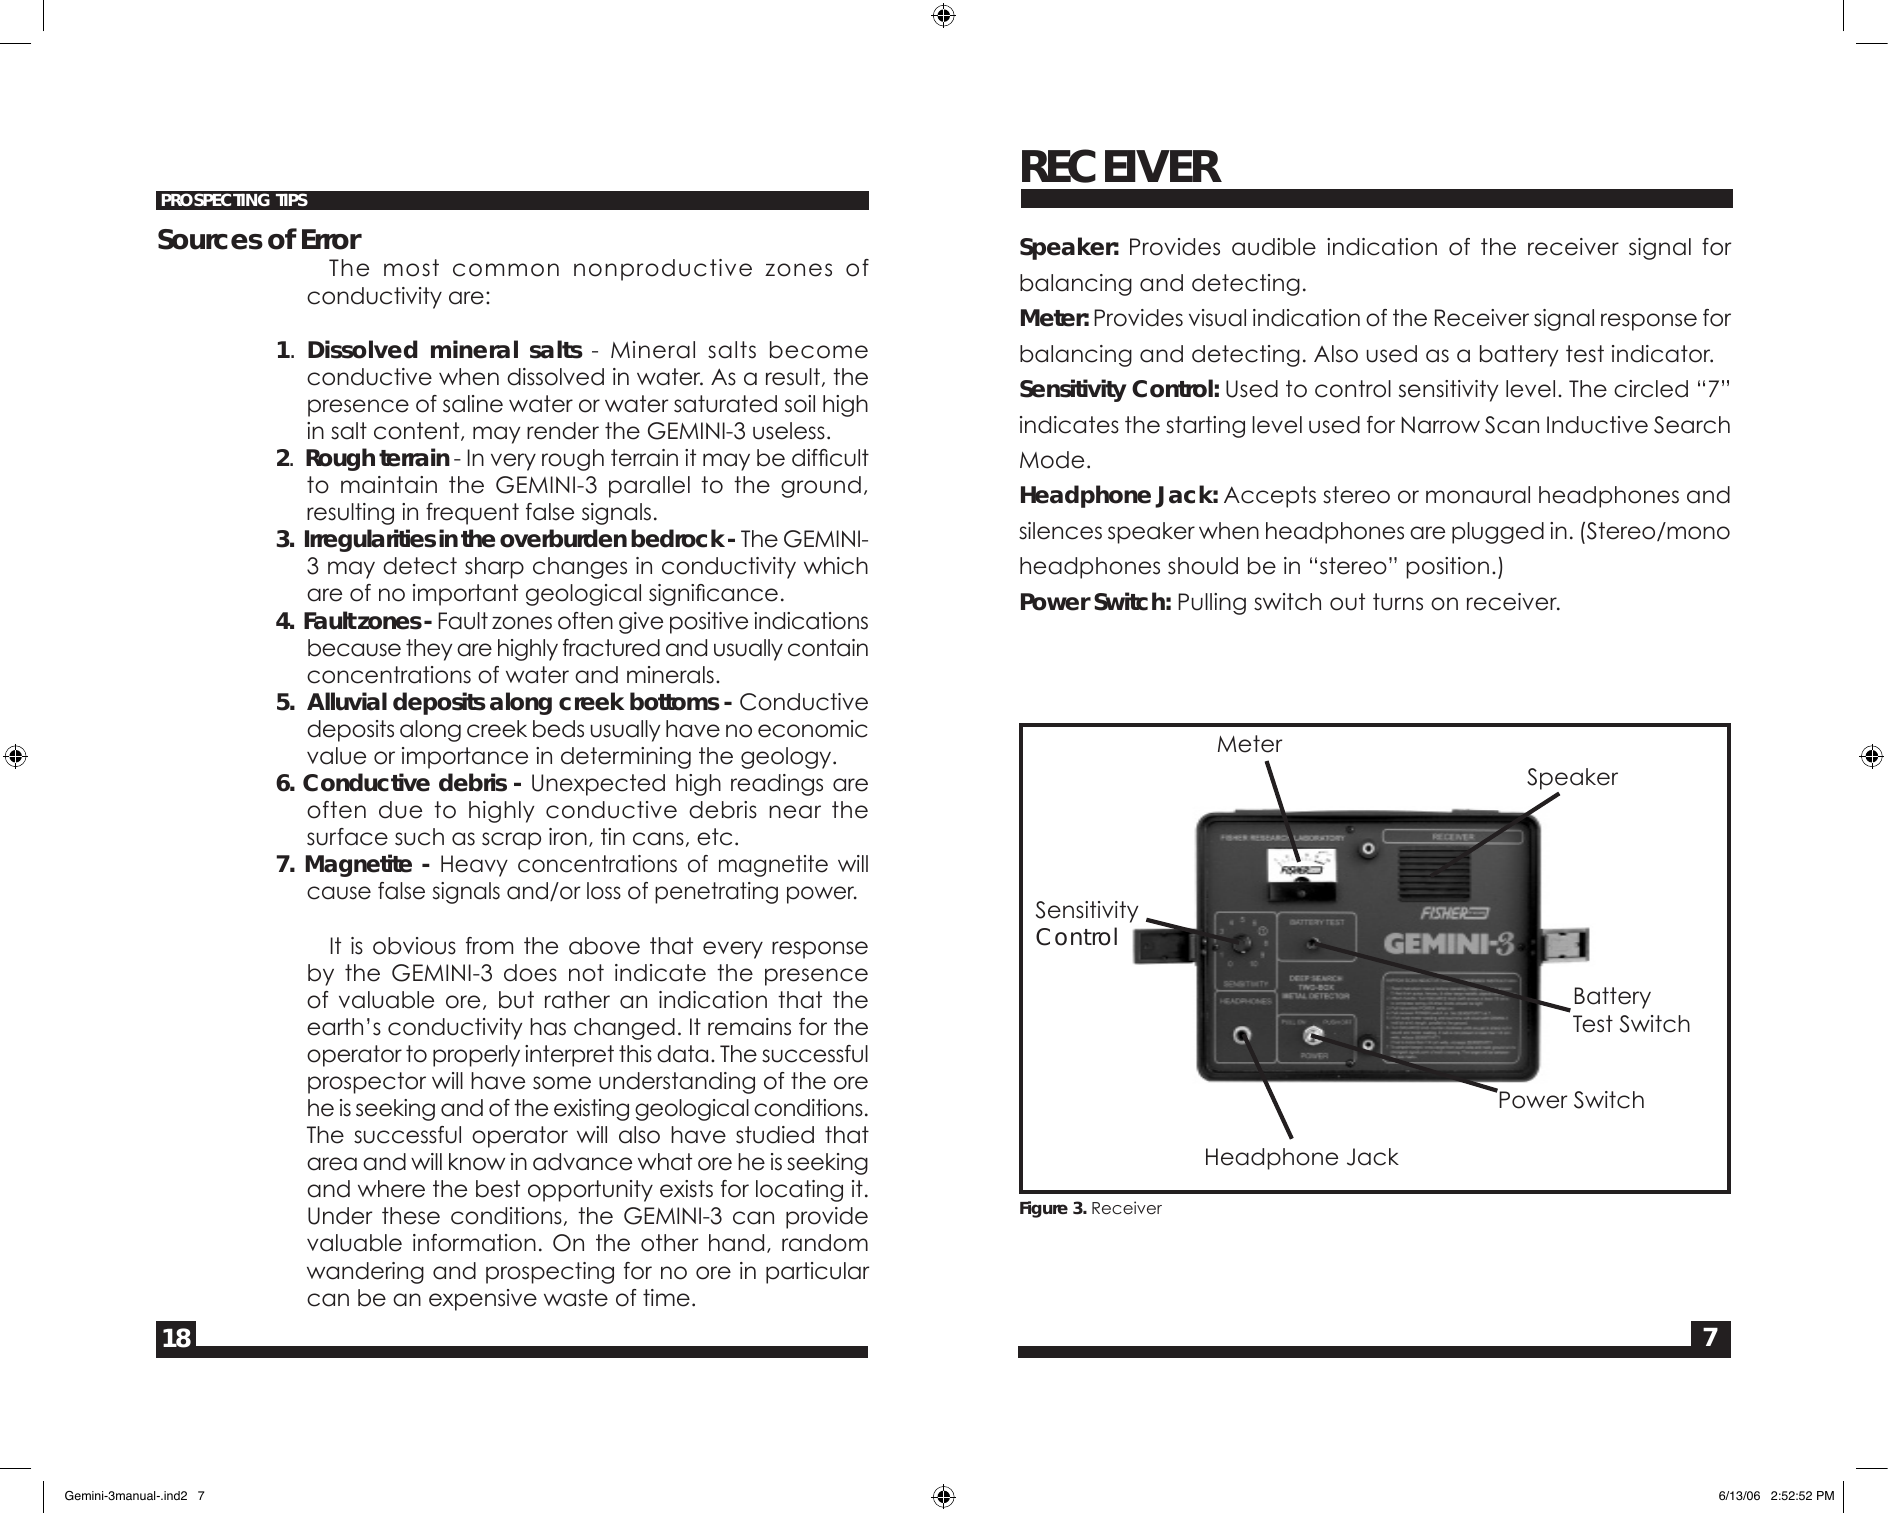 Page 7 of 12 - Fisher Fisher-M-Scope-Gemini-3-Users-Manual-  Fisher-m-scope-gemini-3-users-manual